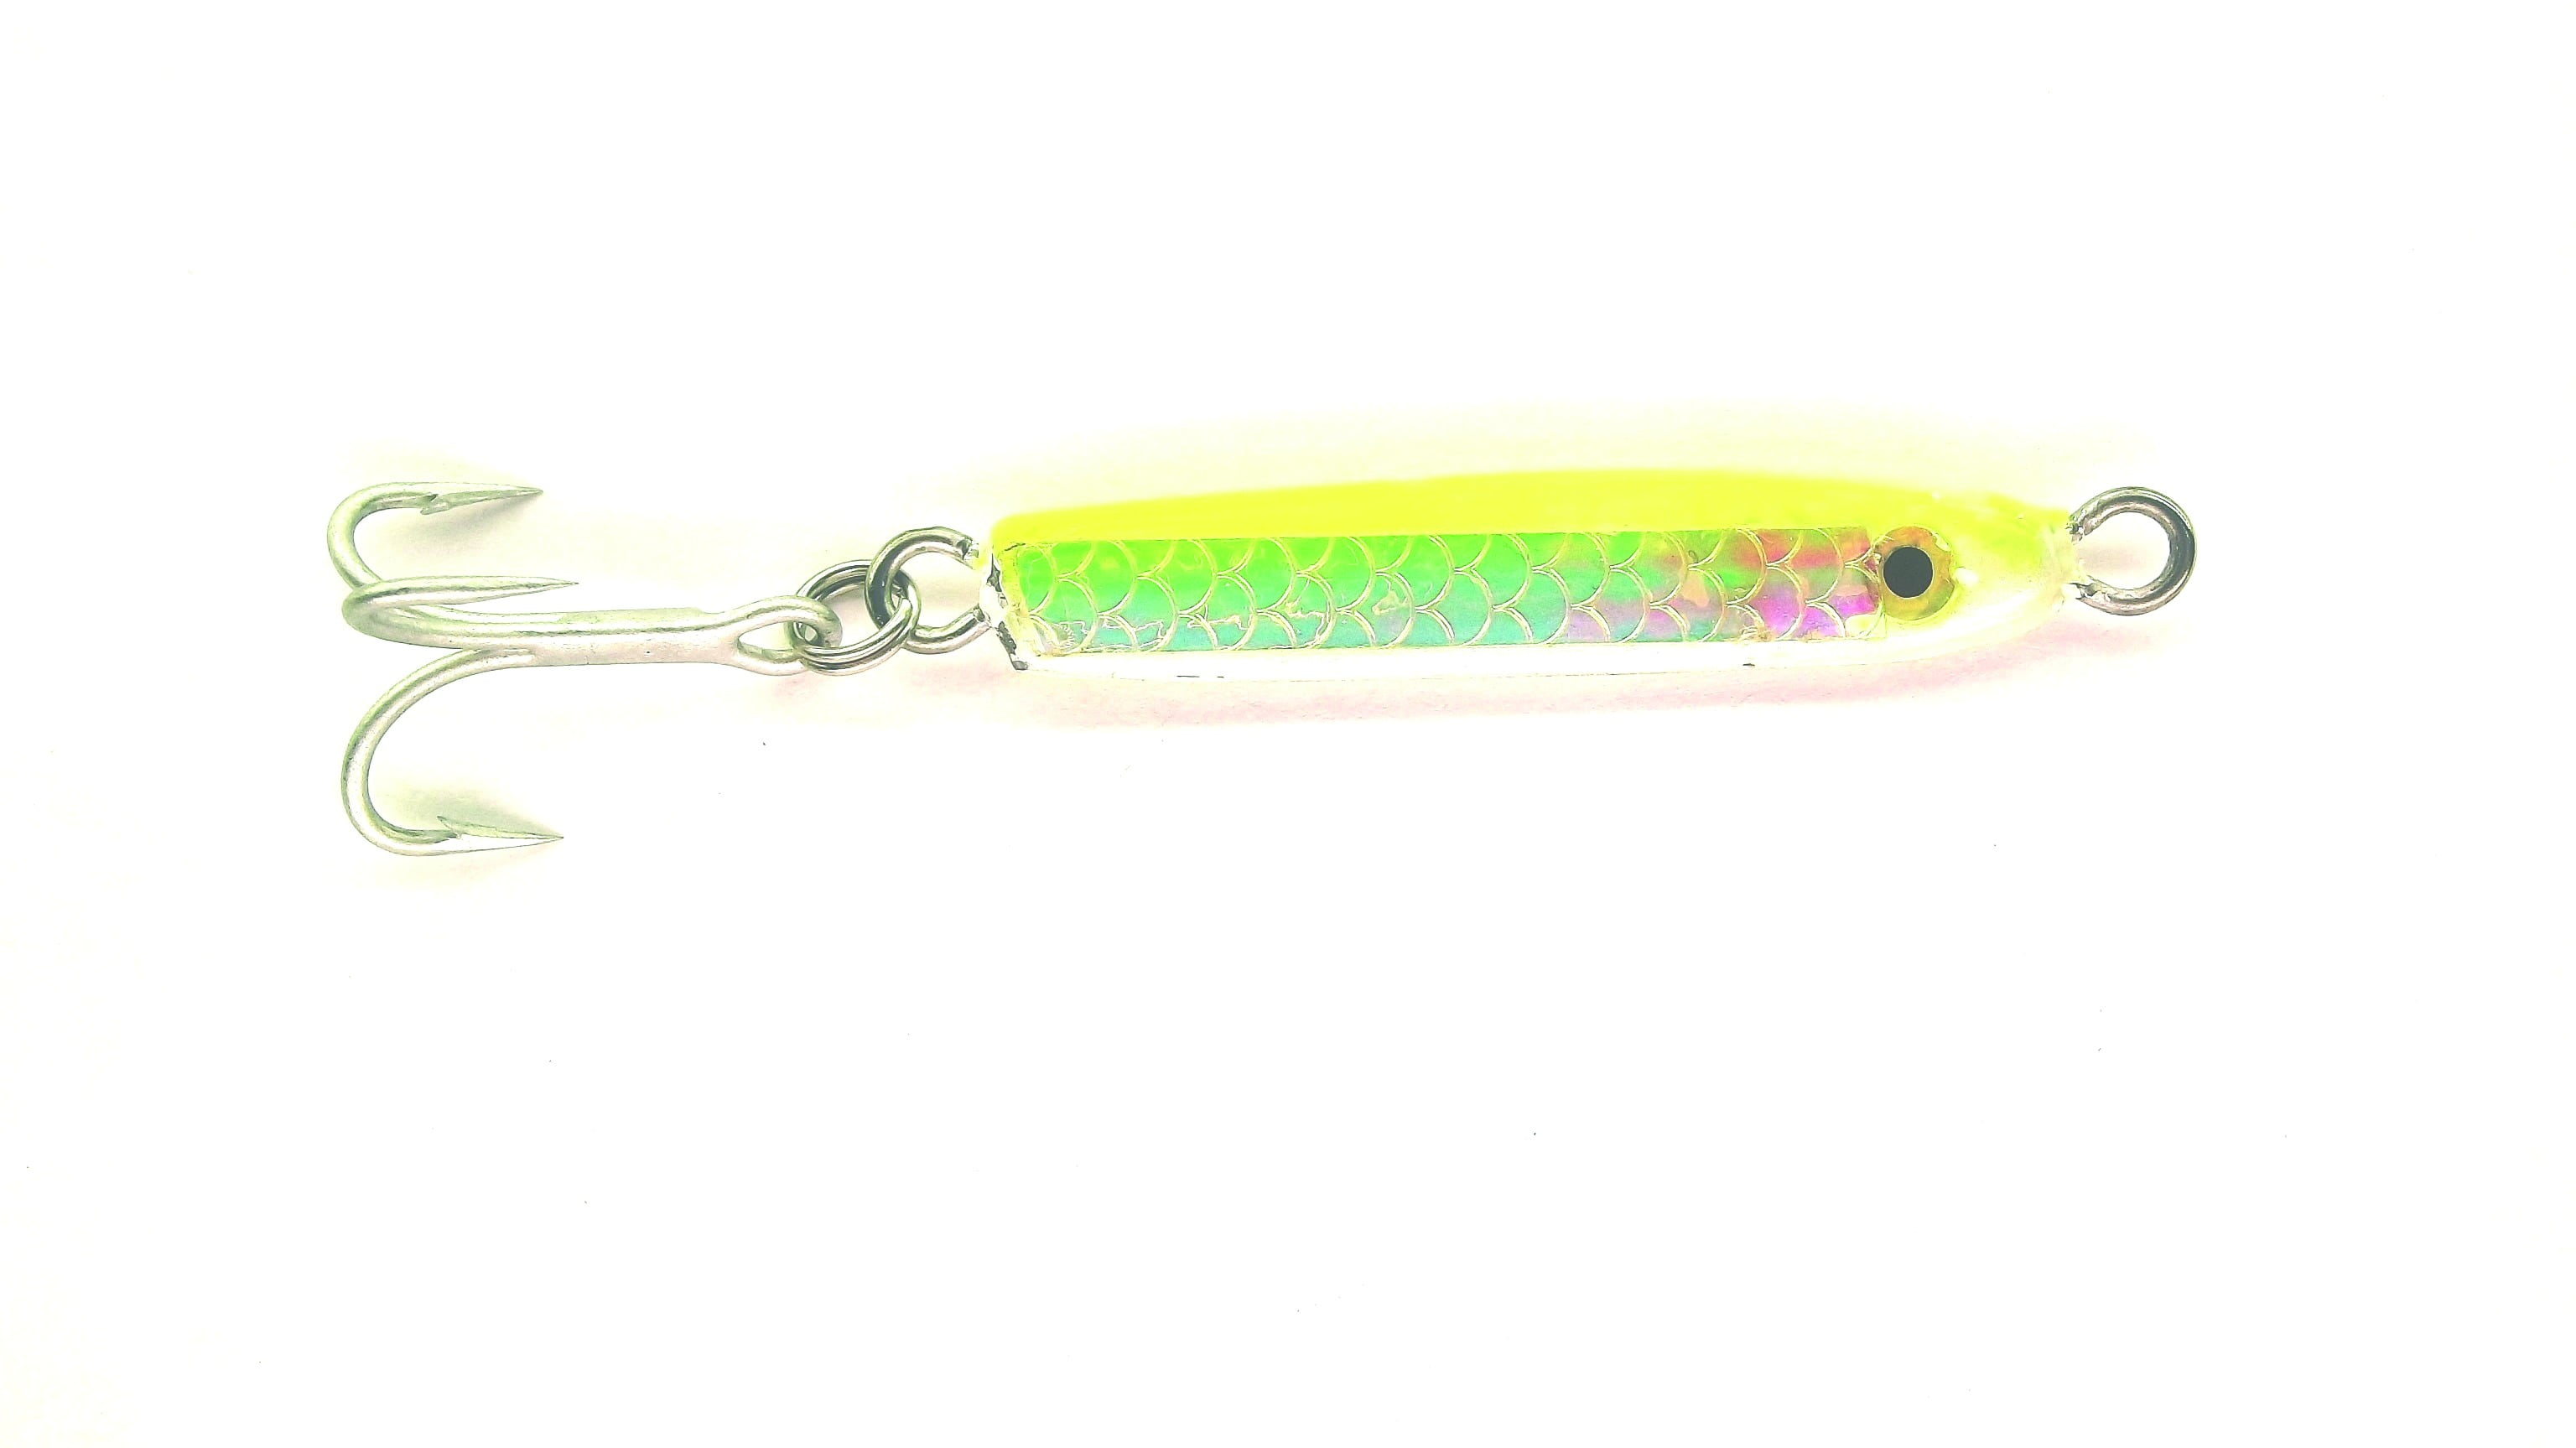 LONG DISCOUNT FOR 2+ 1 Gator Spoon Metal Lure Chrome w/Silver Prism Tape 2oz 